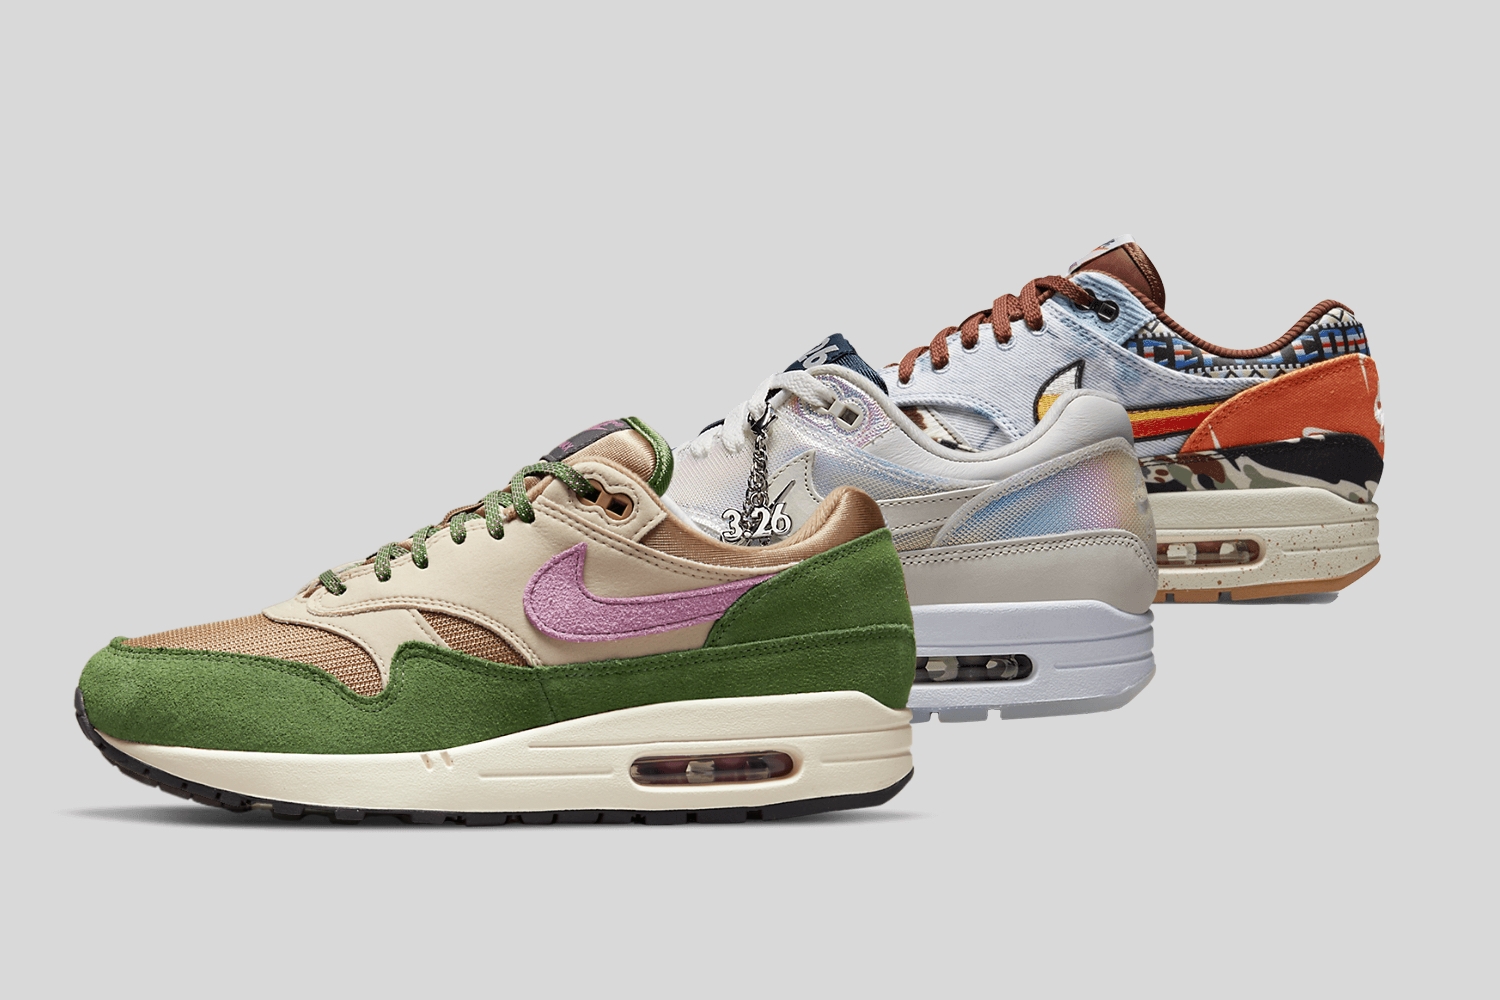 Best selling Nike Air Max 1's now on StockX